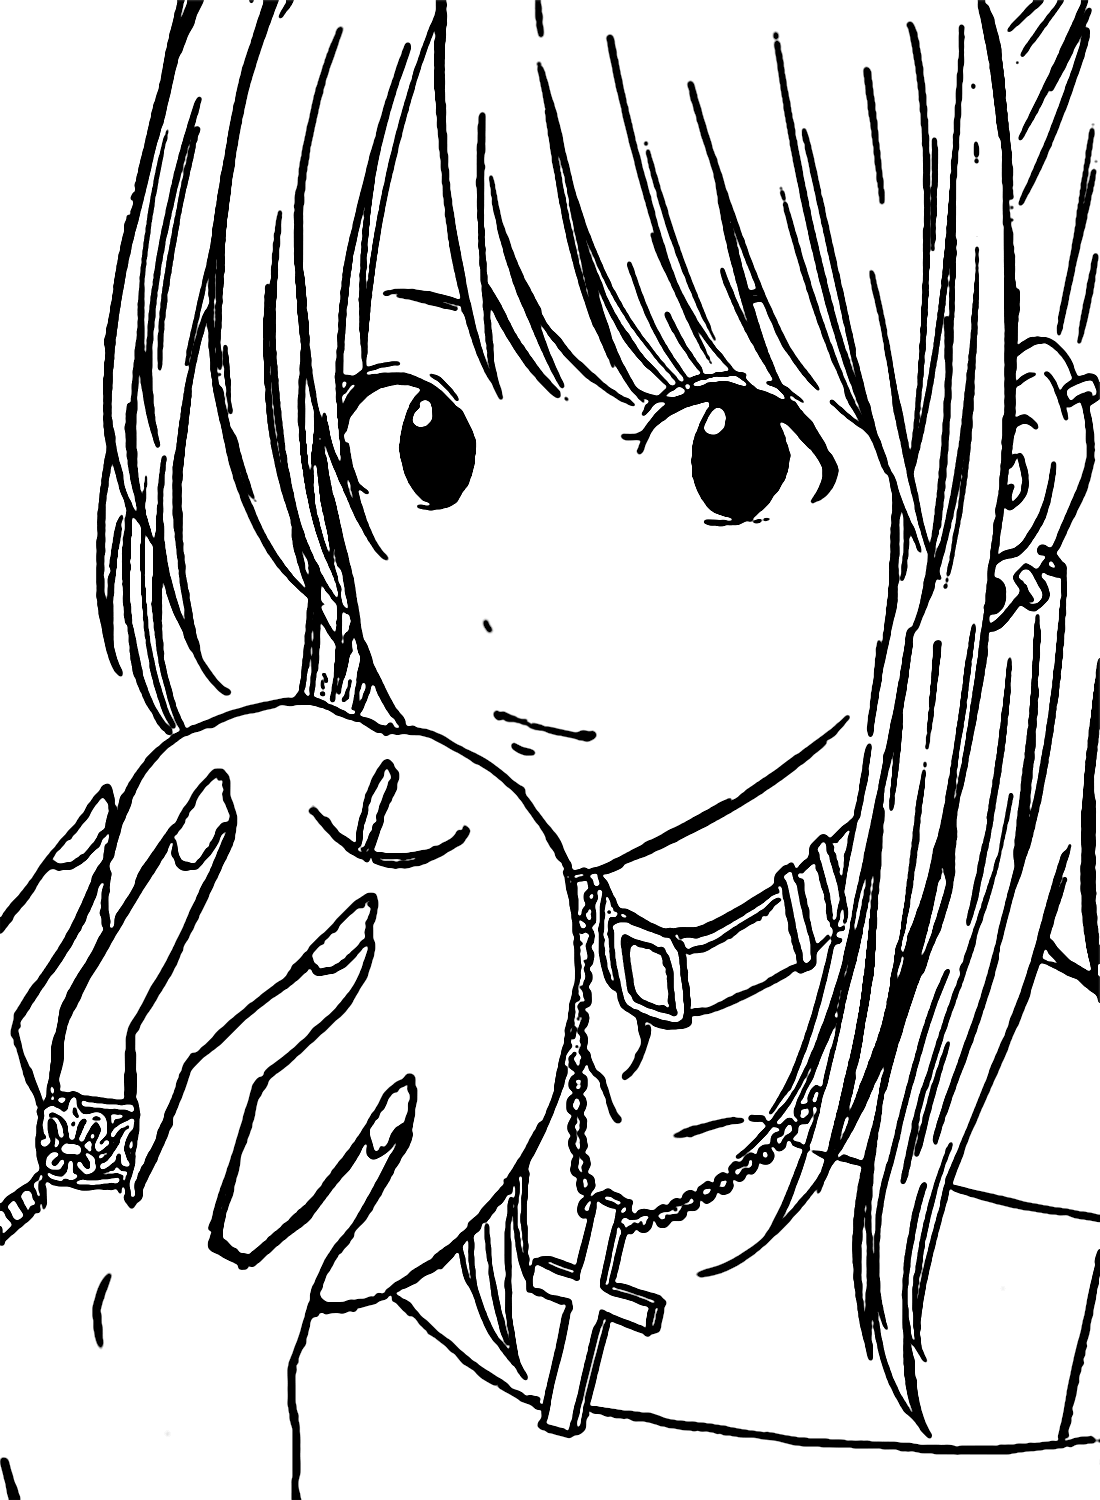 Misa Amane with An Apple to Color - Free Printable Coloring Pages